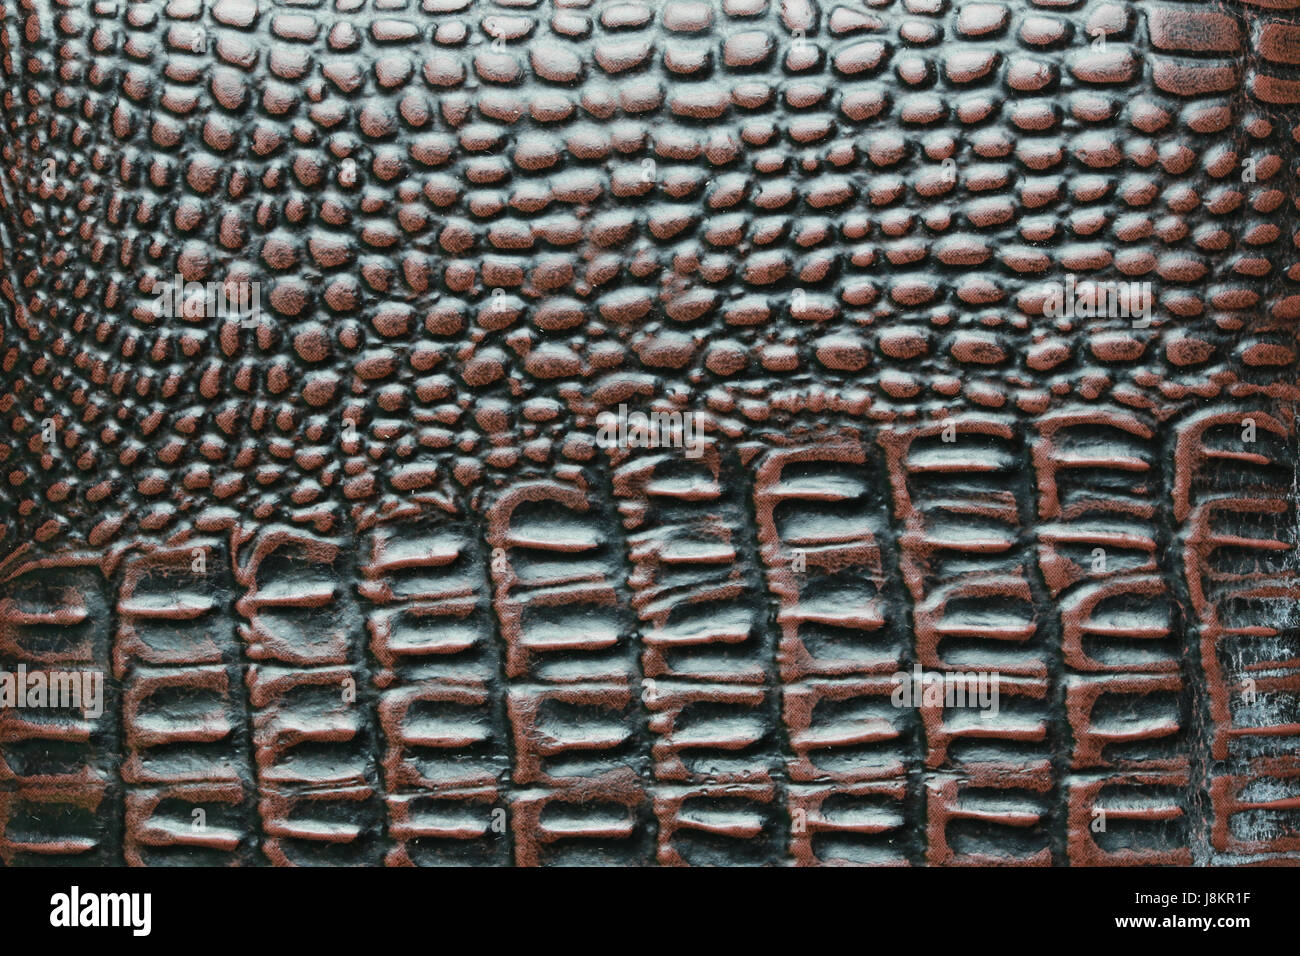 Crocodile skin bag hi-res stock photography and images - Alamy